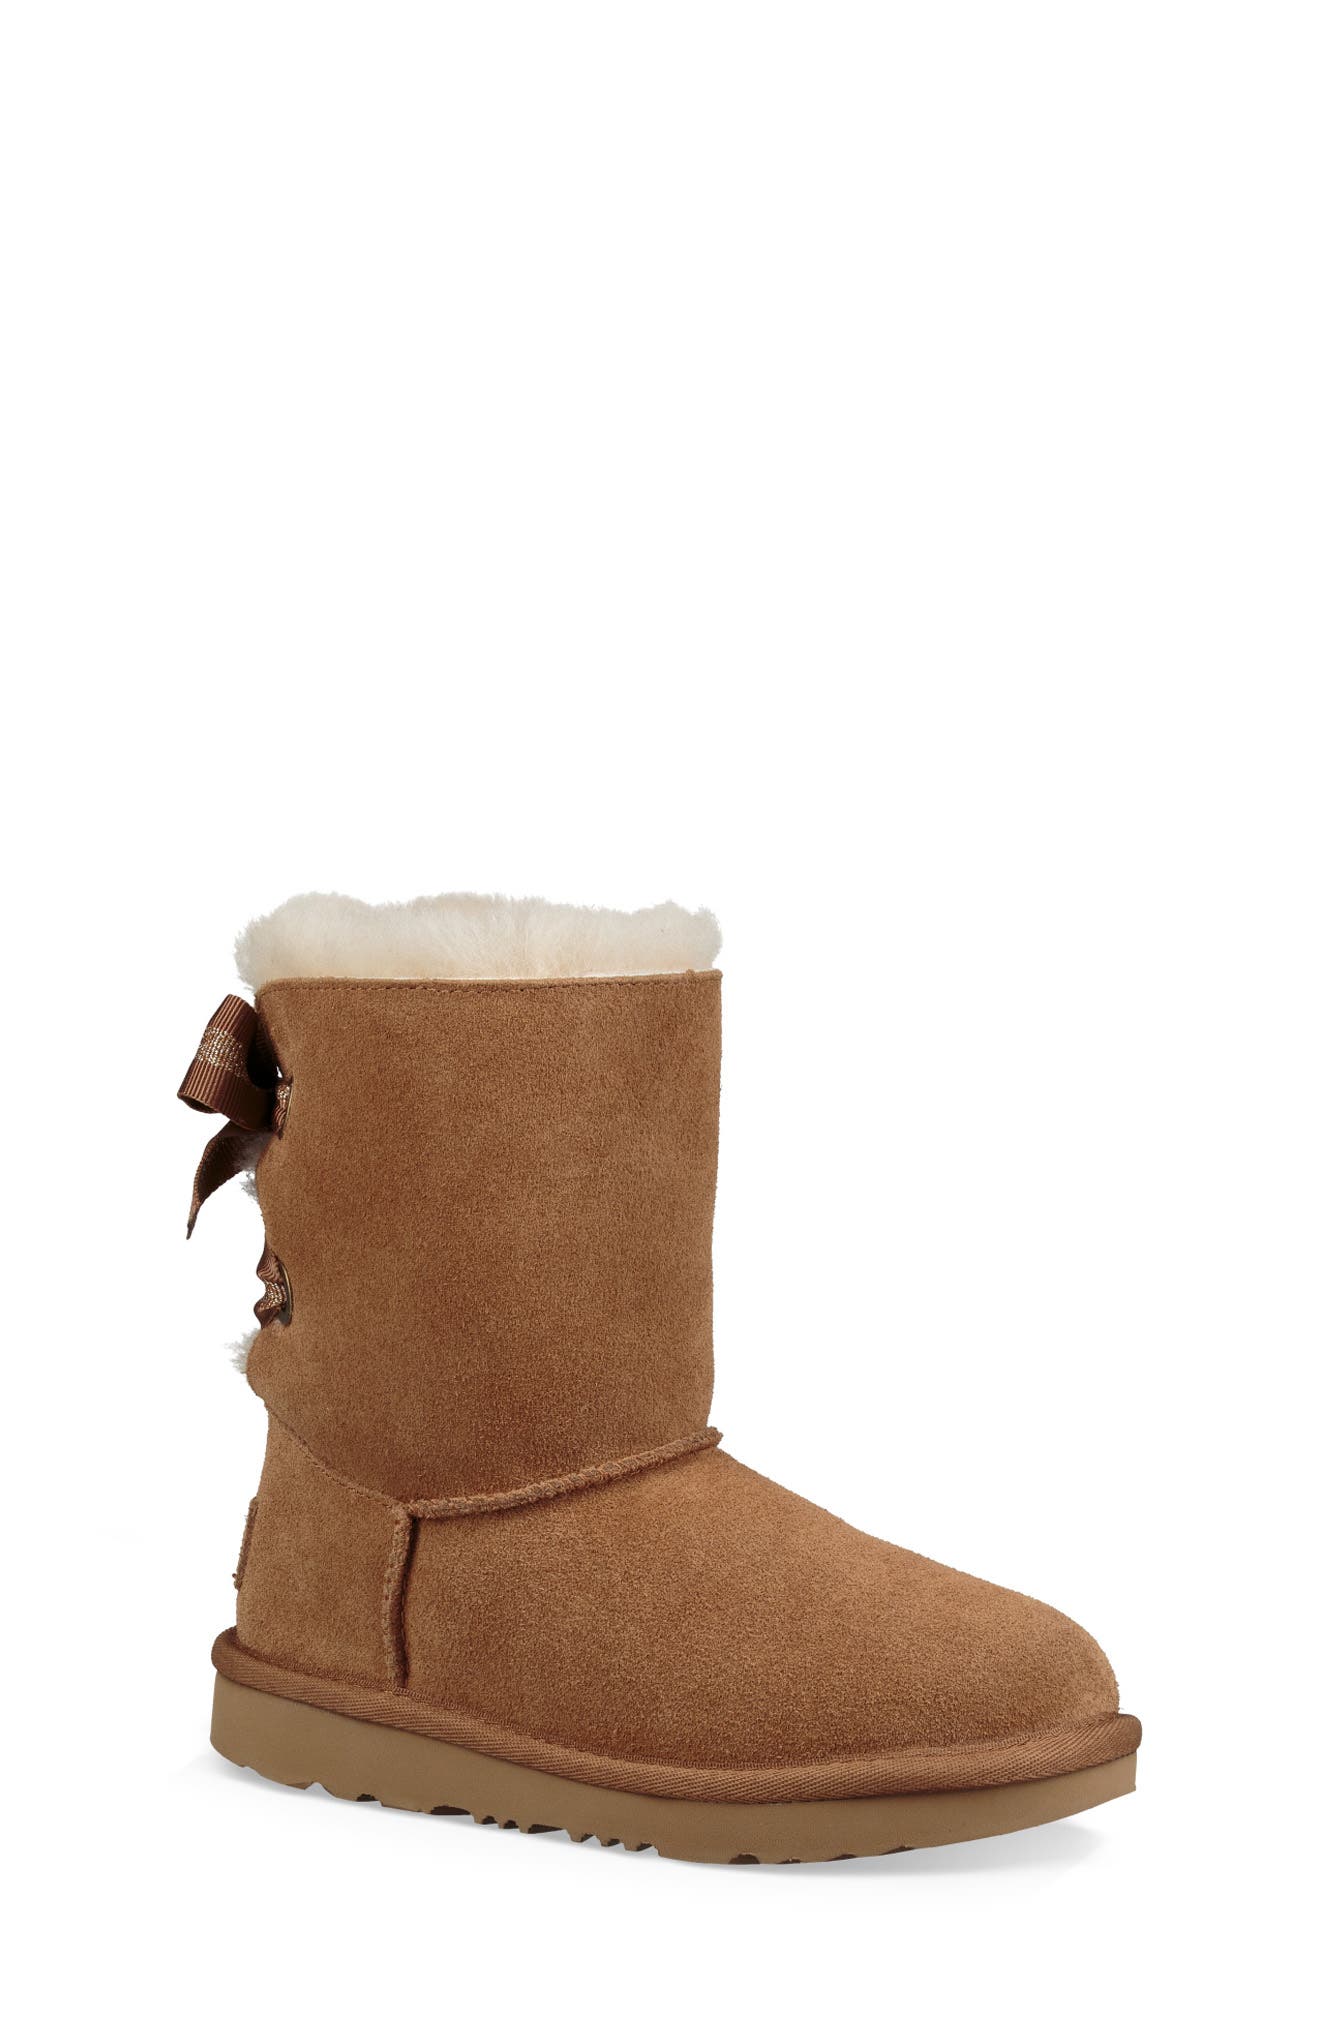 bailey bow uggs nordstrom